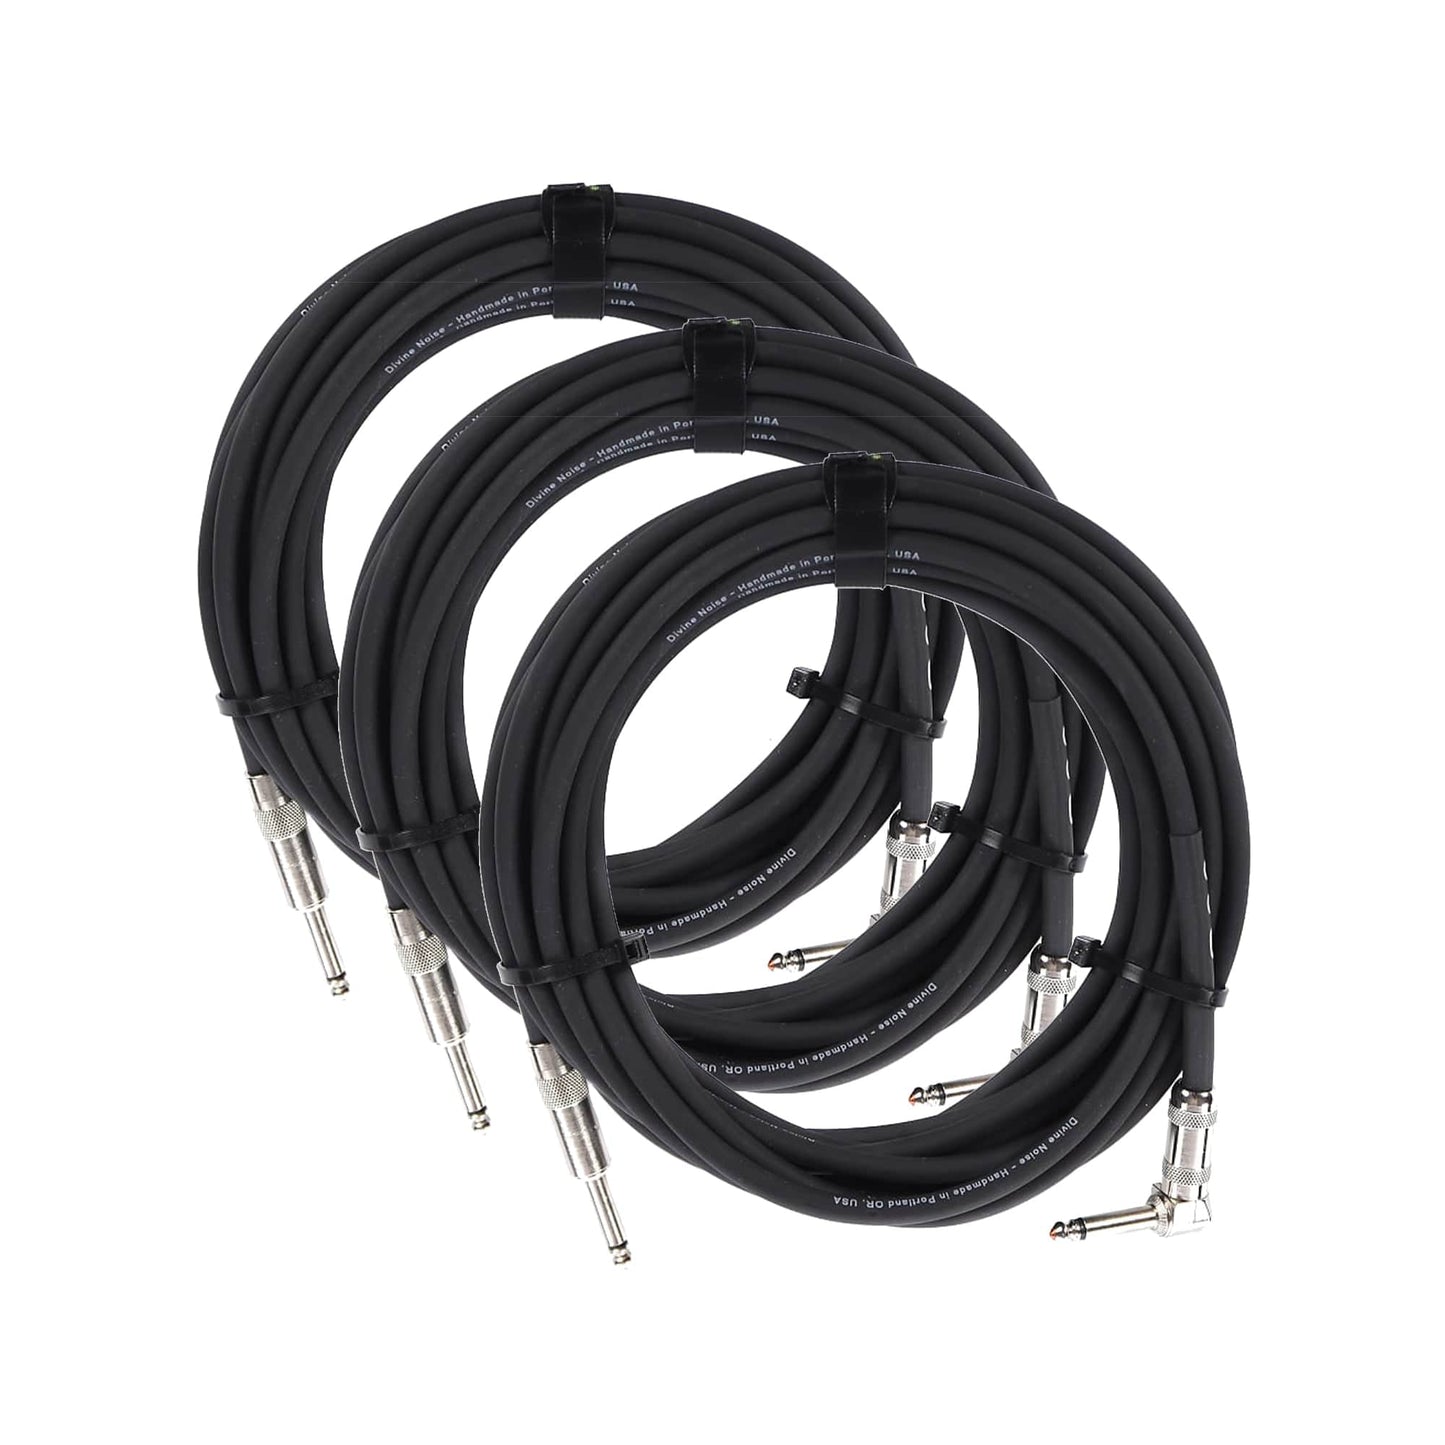 Divine Noise Straight Cable Black 25' Straight/Straight 3 Pack Bundle Accessories / Cables